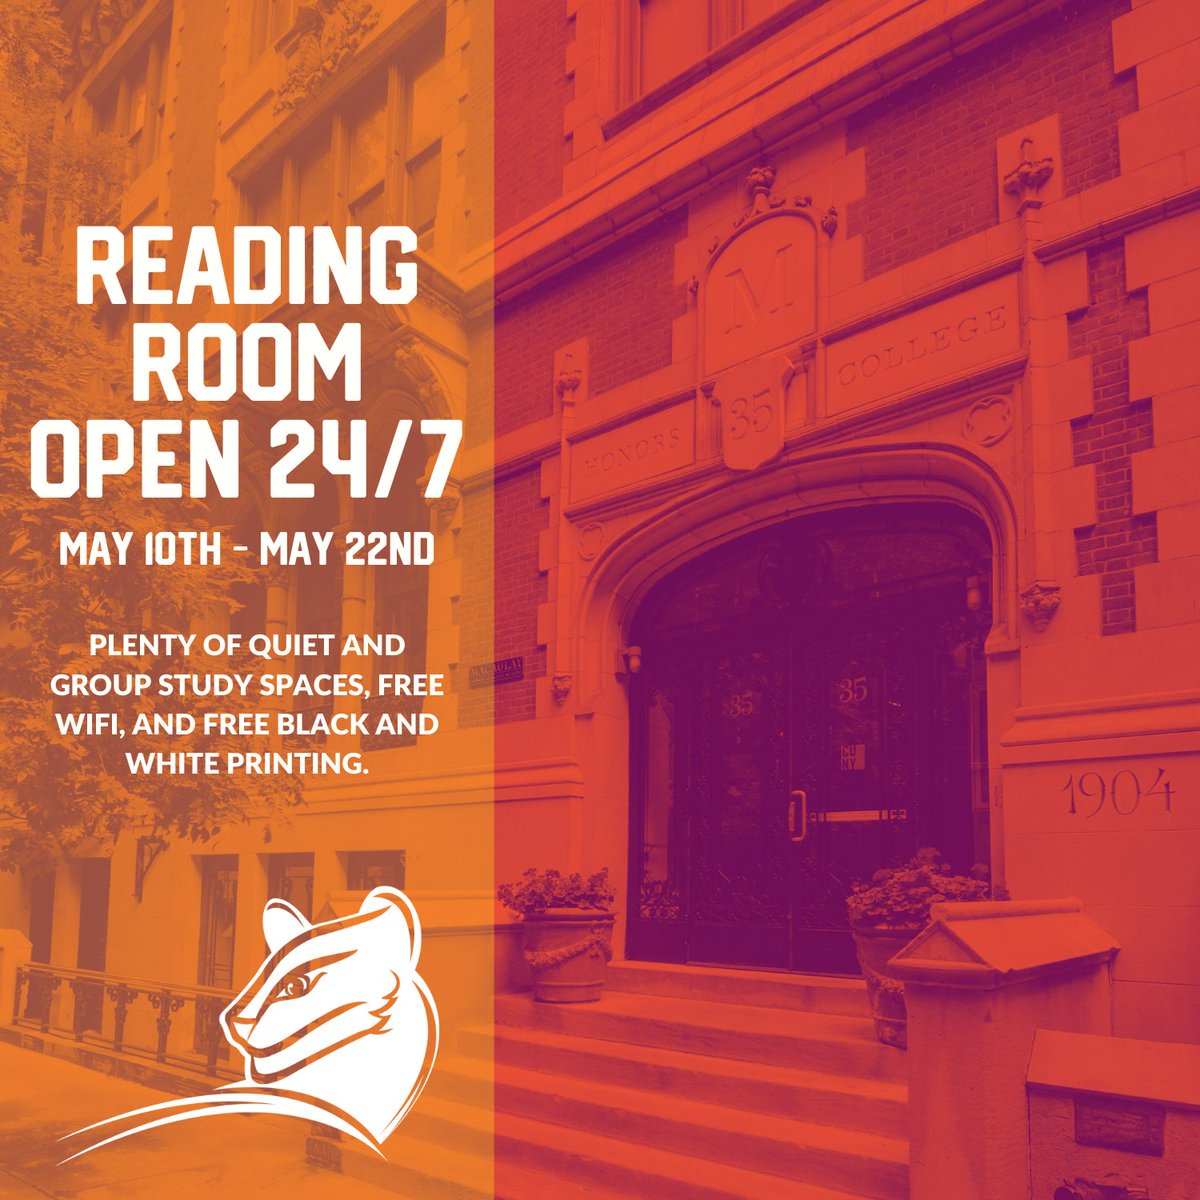 ⏰ The Macaulay Building will be open 24/7 until Wednesday, May 22nd. Give us a visit and enjoy quiet study spaces, free printing, coffee & tea, and more! Wishing everyone a successful finals season. 📚